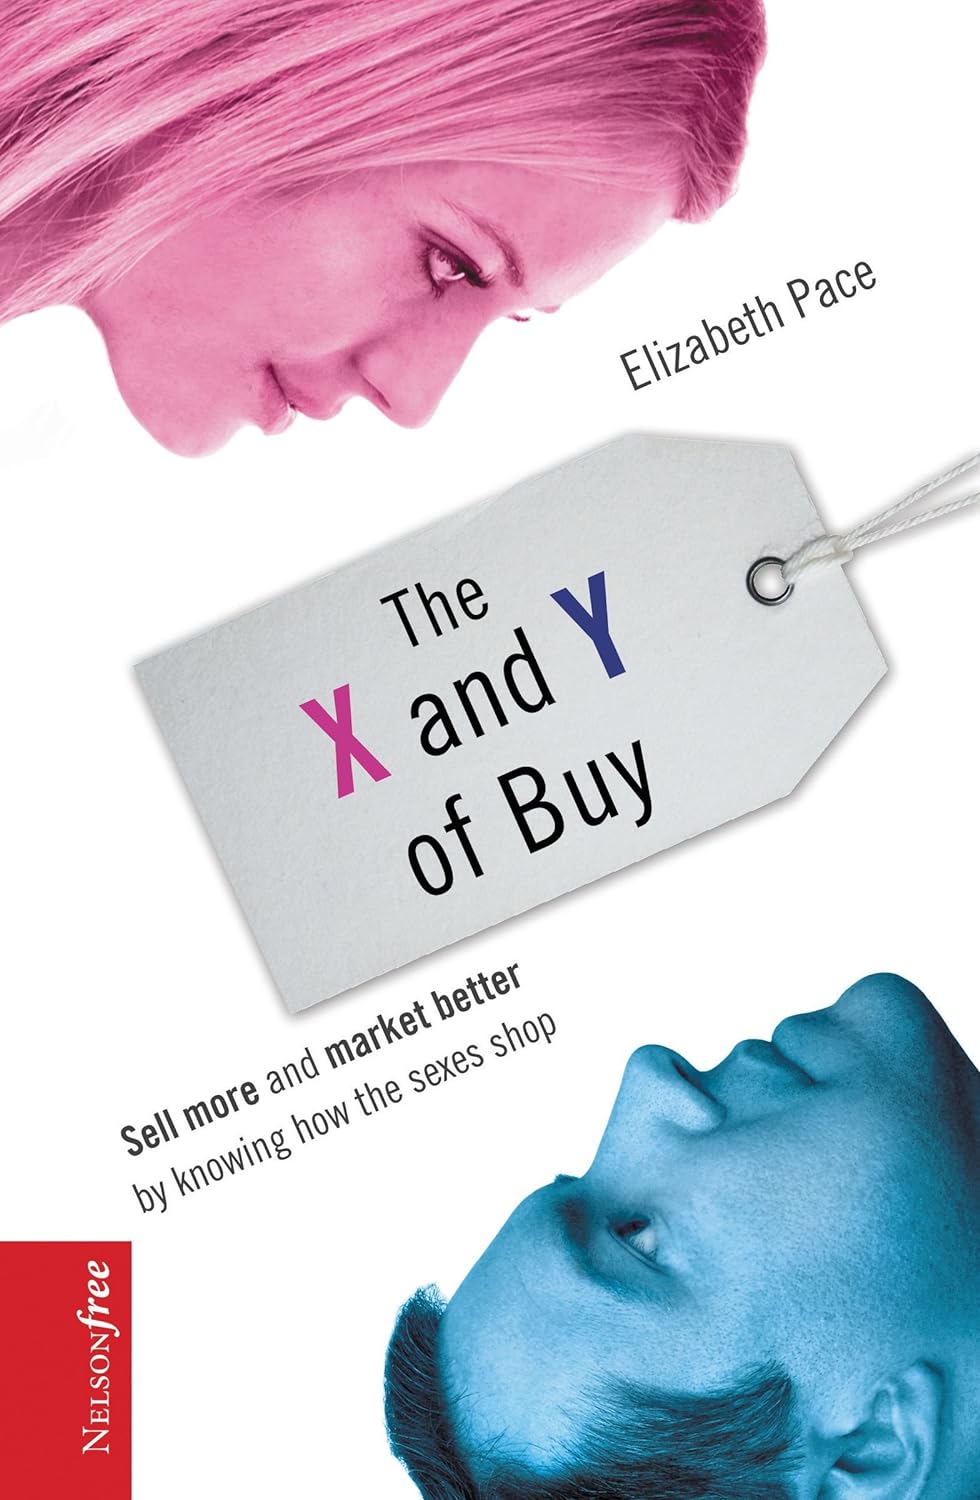 THE X AND Y OF BUY BY: ELEZBETH PACE